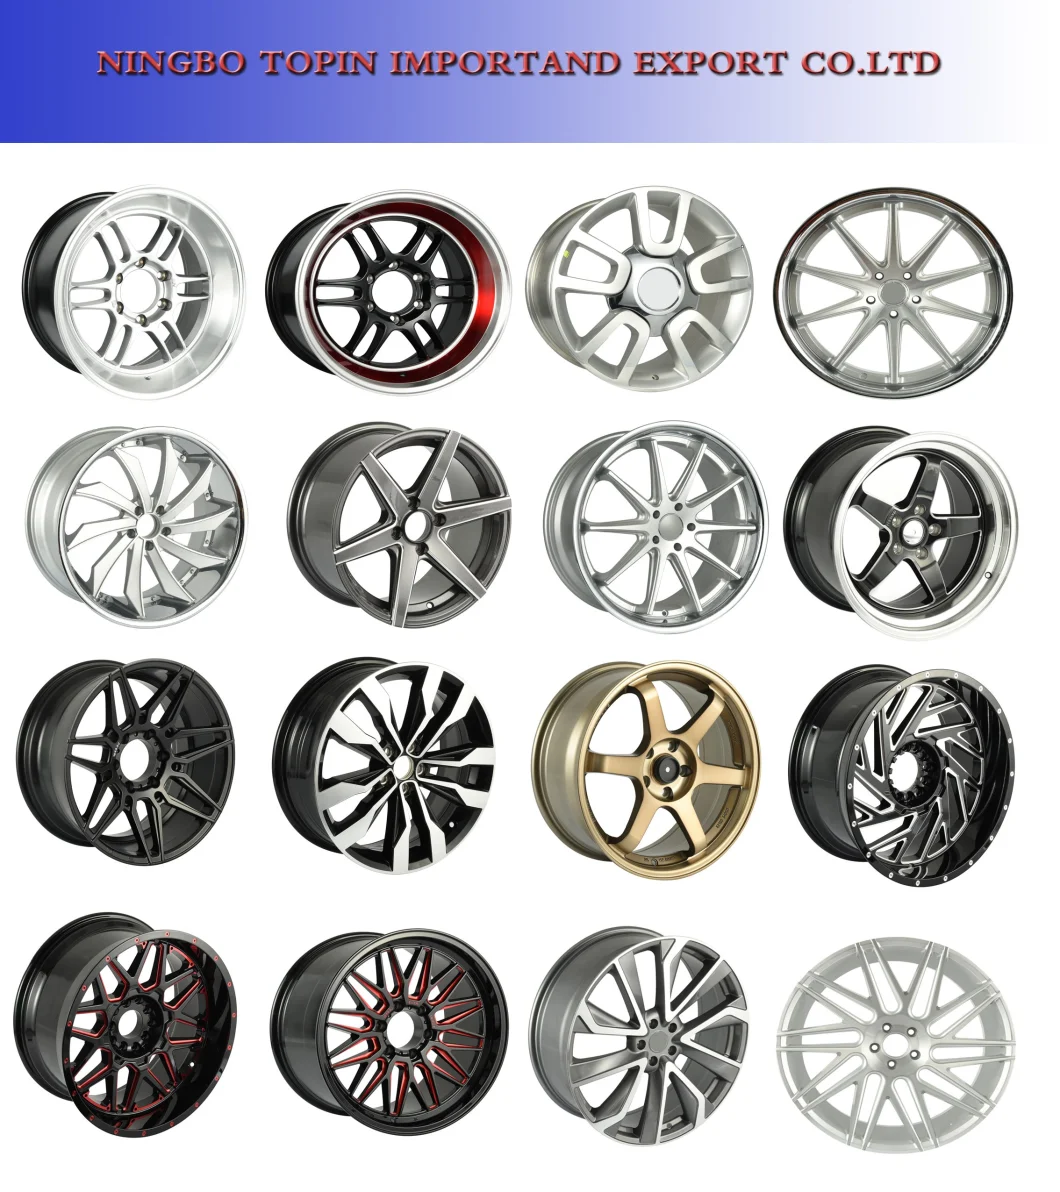 Staggered Alloy Wheel with Mesh Design Big Size 22inch 20inch